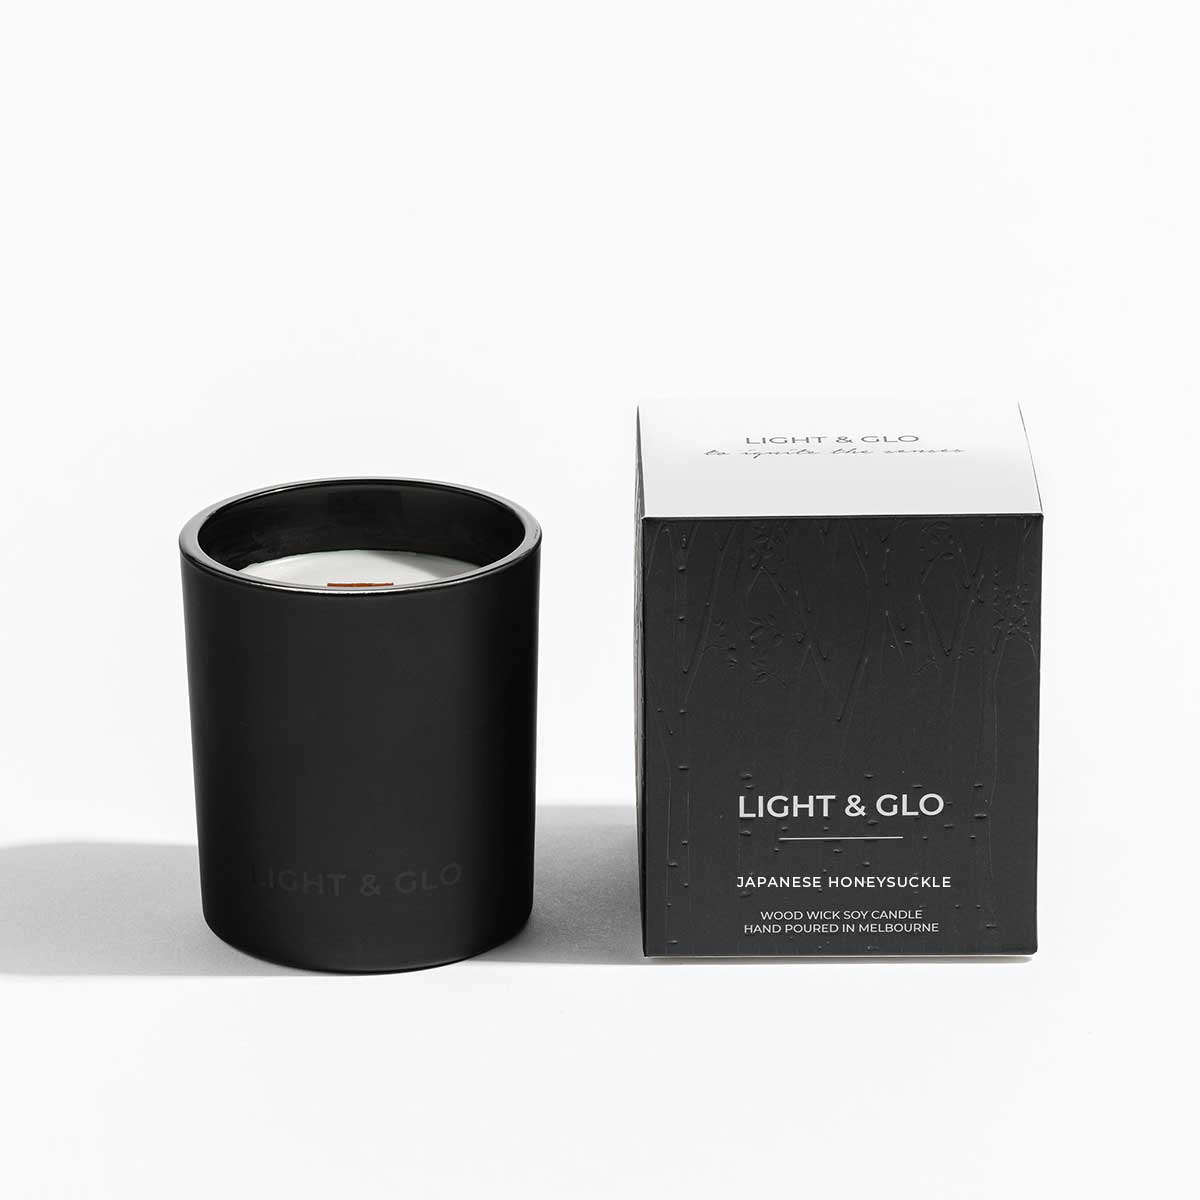 Japanese Honeysuckle - Monochrome Large 300g Candle | Luxury Candles & Home Fragrances by Light + Glo